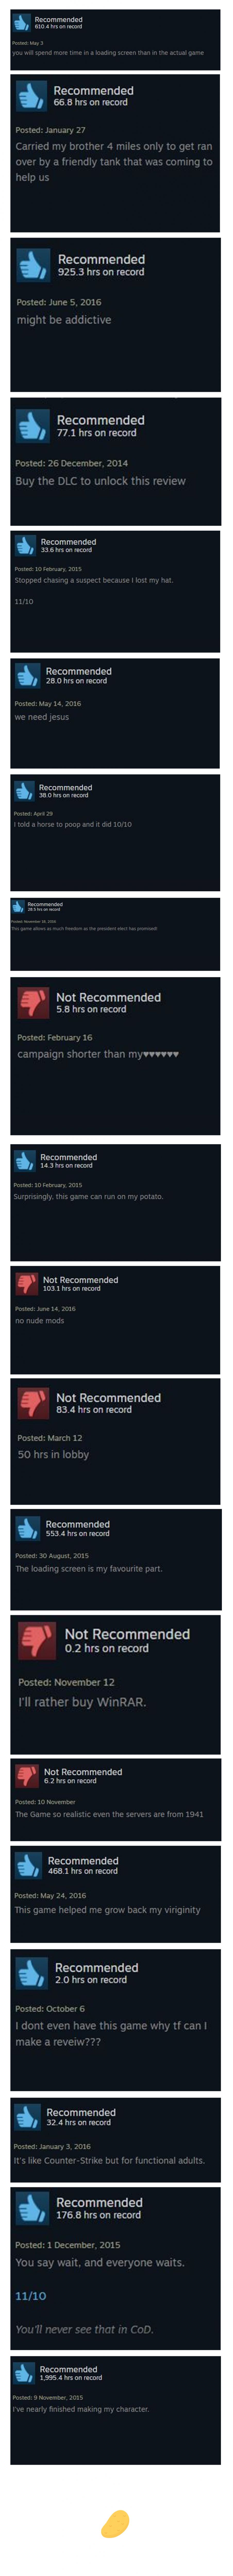 20 Hilarious Steam Reviews [ 80+ more in the comment]